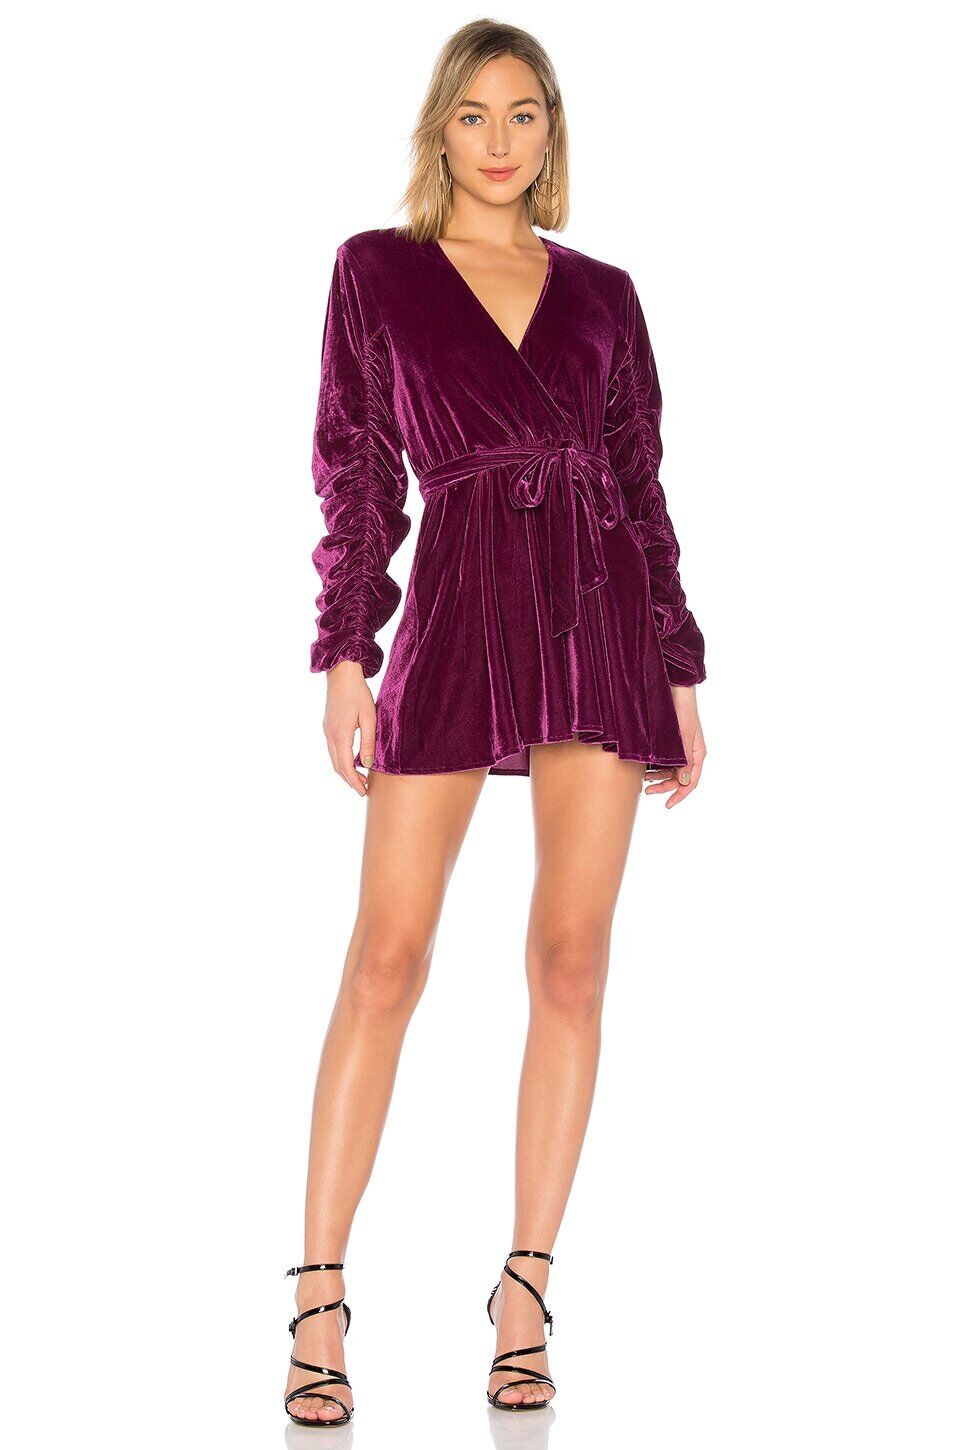 Tularosa Tawney Dress in Burgundy-Faux Wrap Styling with Side Tie Closure